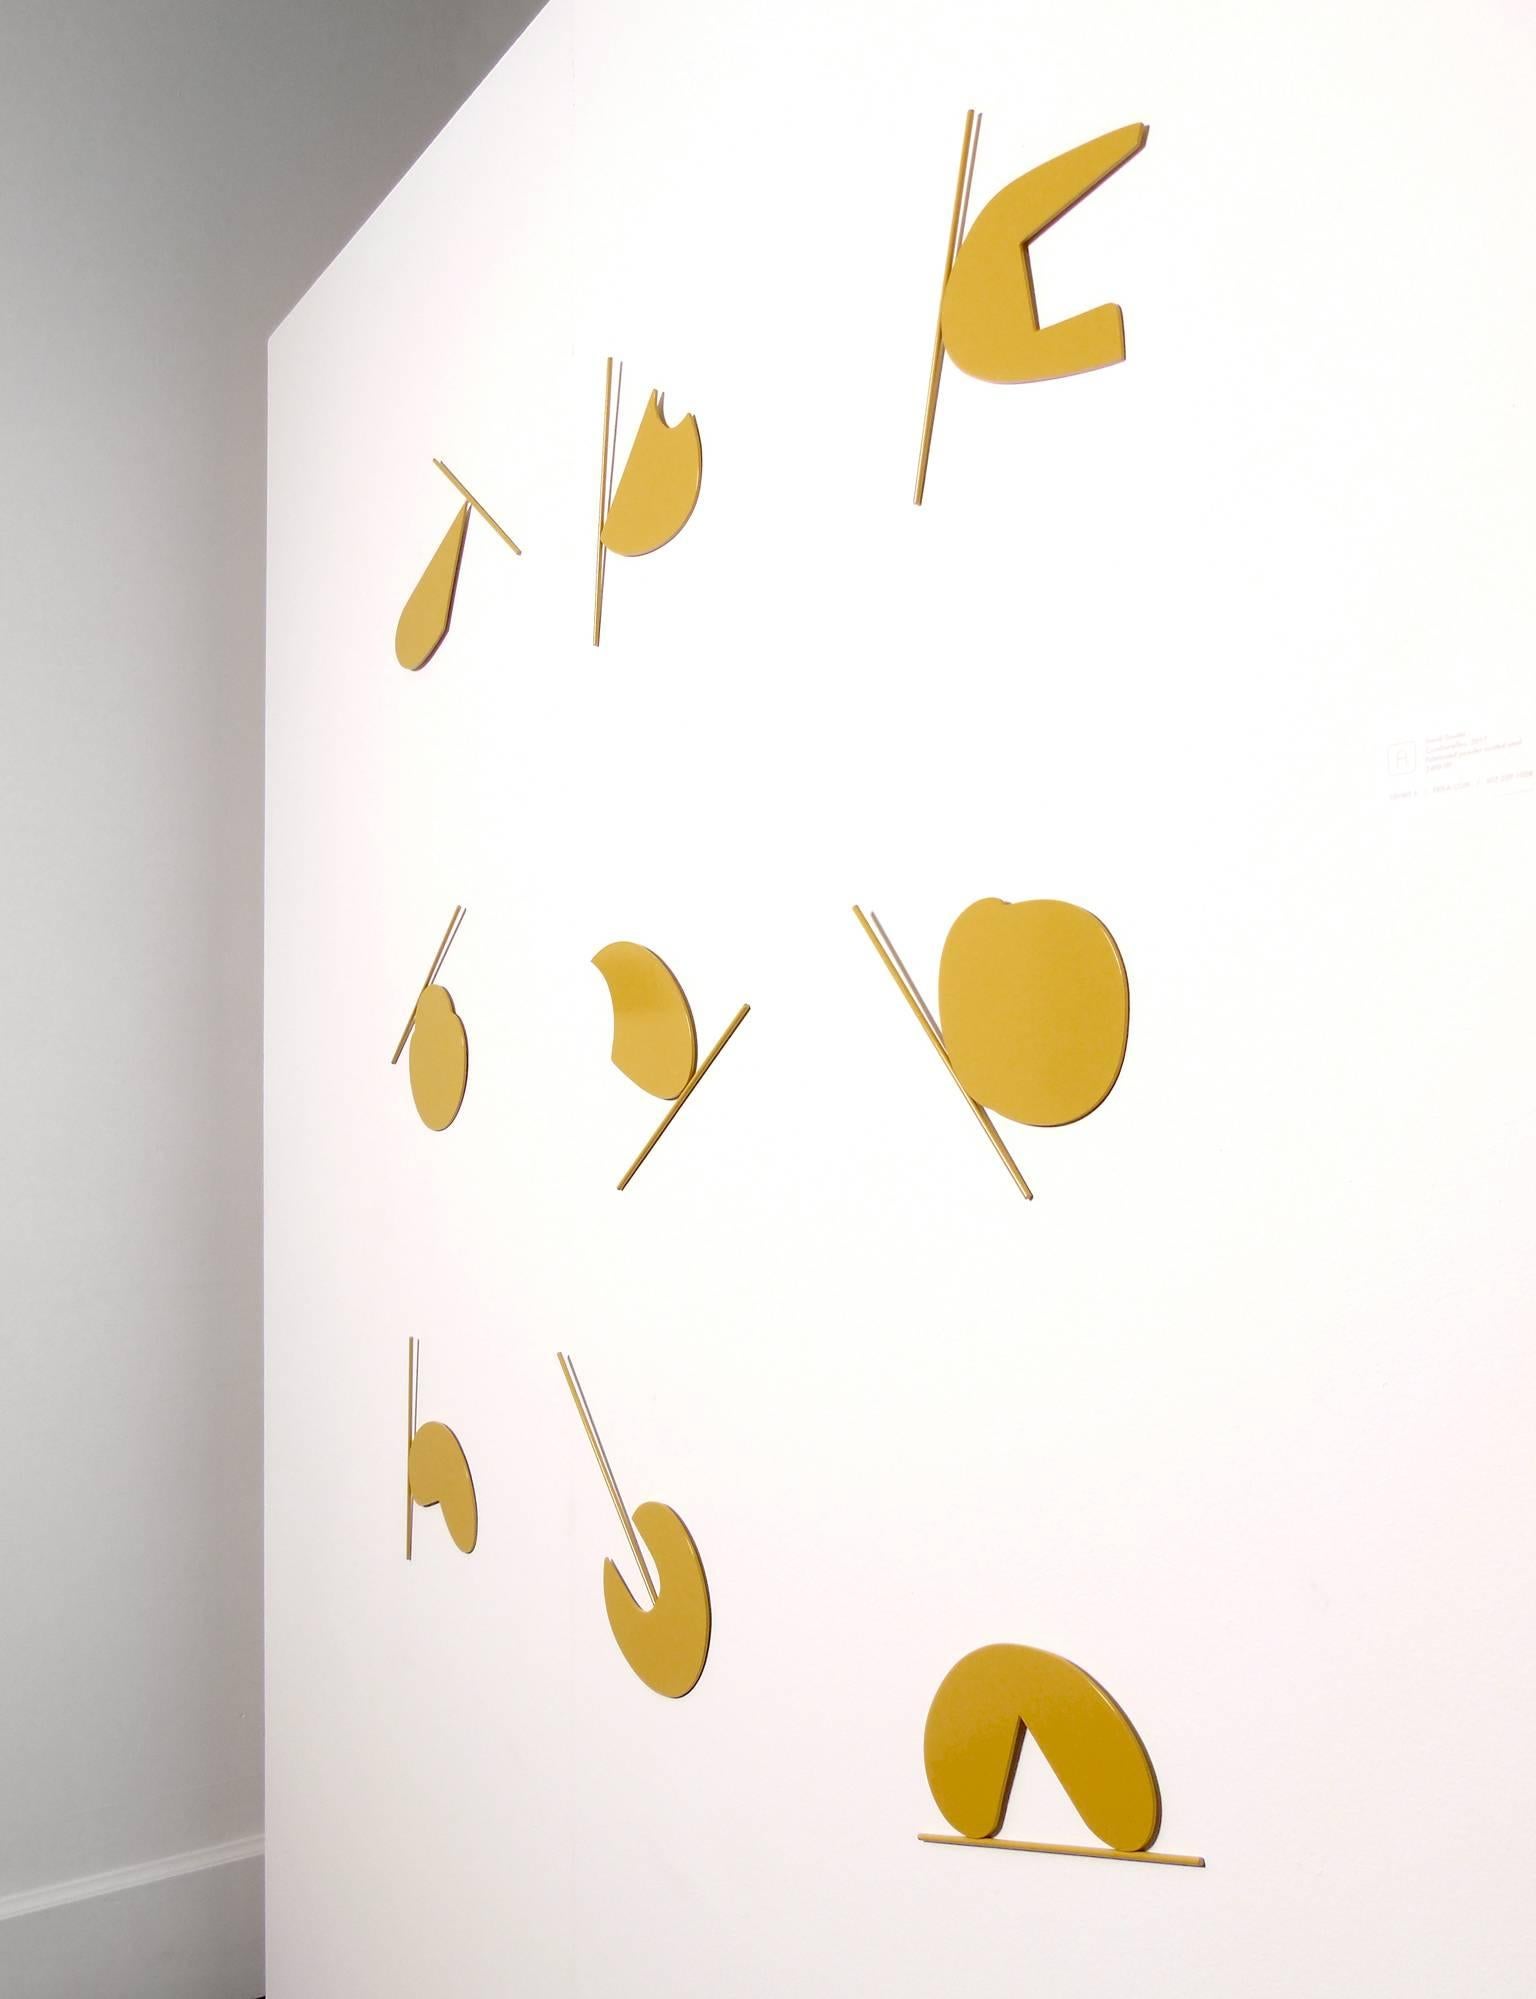 Combarelles by David Dowler is made up of nine cut steel shapes in a deep, almost ochre yellow. It is a modular wall mounted sculpture that looks almost two-dimensional at first glance. Its graphic look and color have a bold unique look. The 1/8